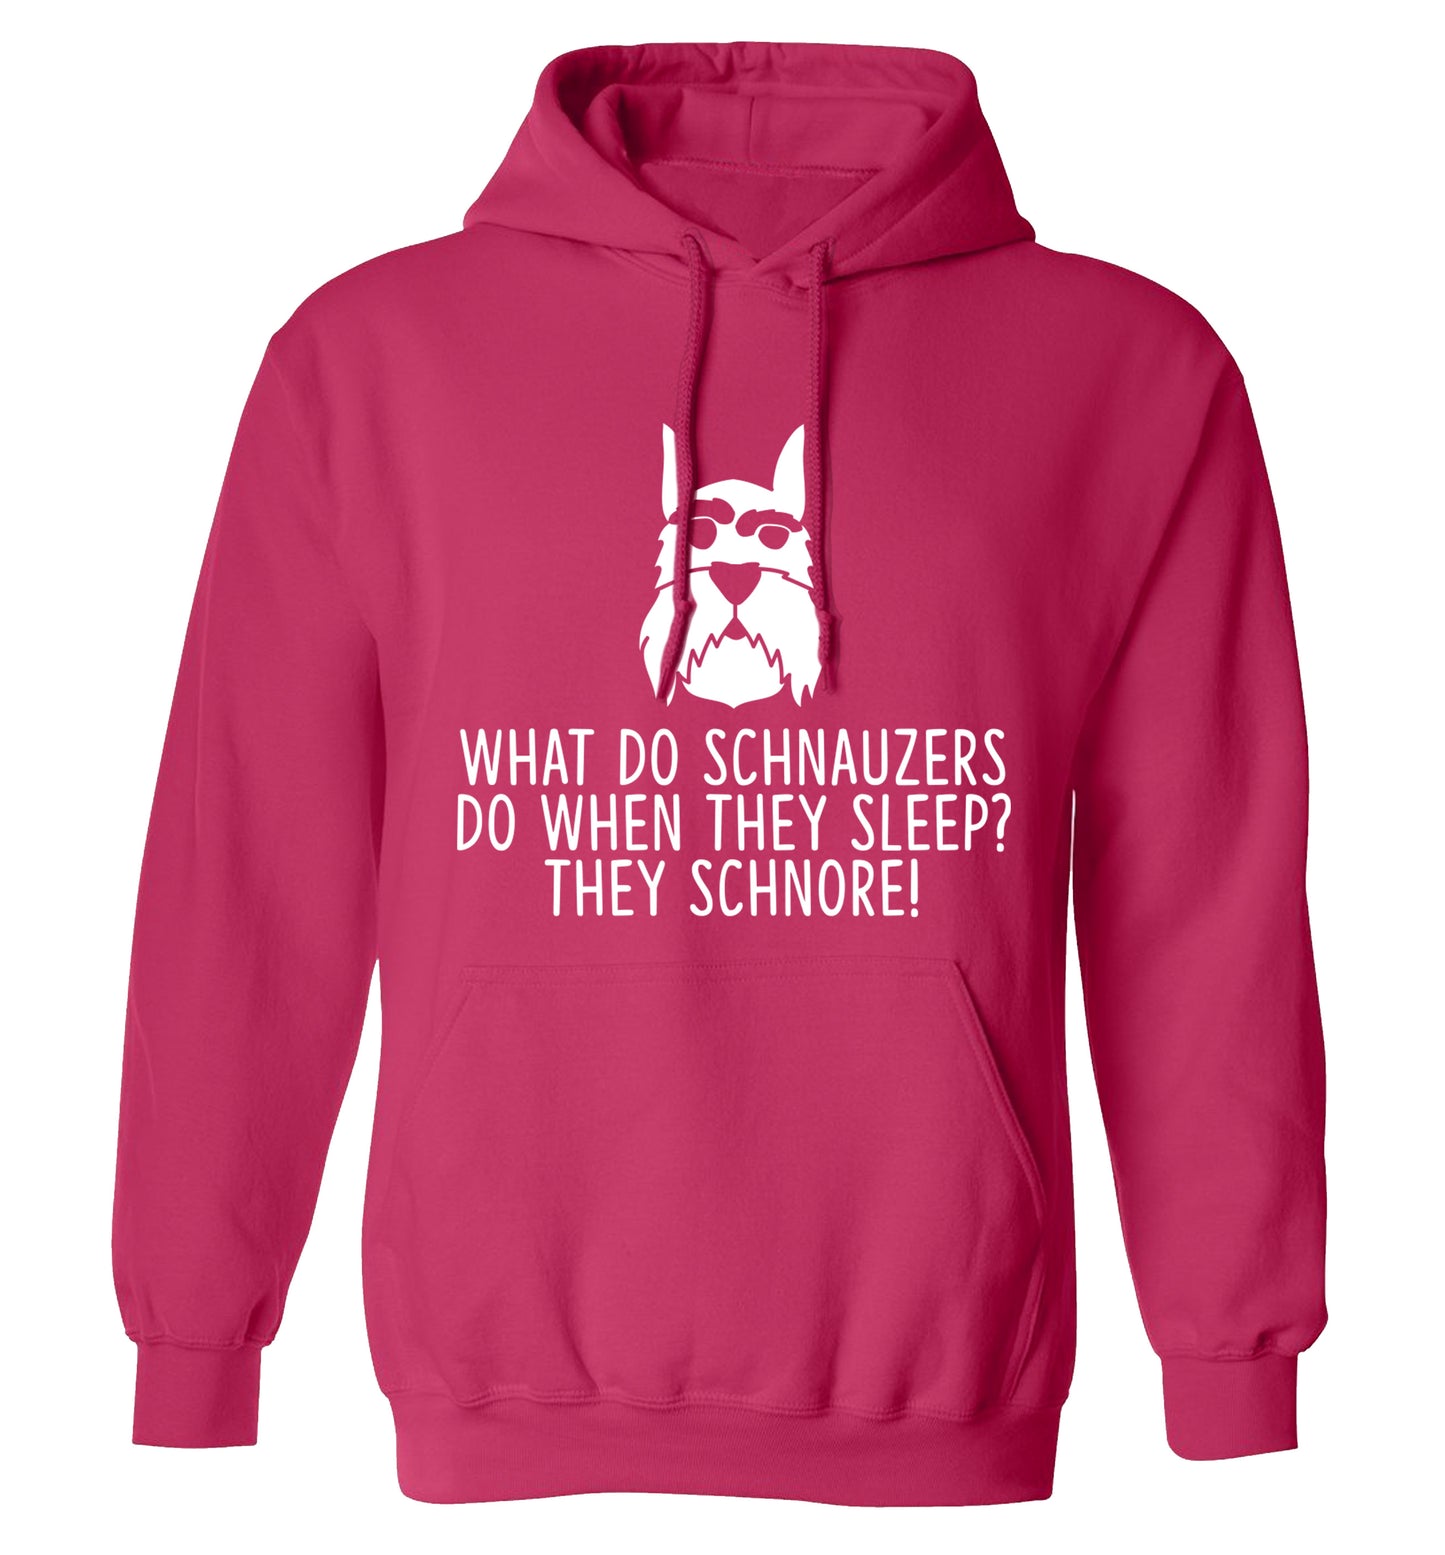 What do schnauzers do when they sleep? Schnore! adults unisex pink hoodie 2XL